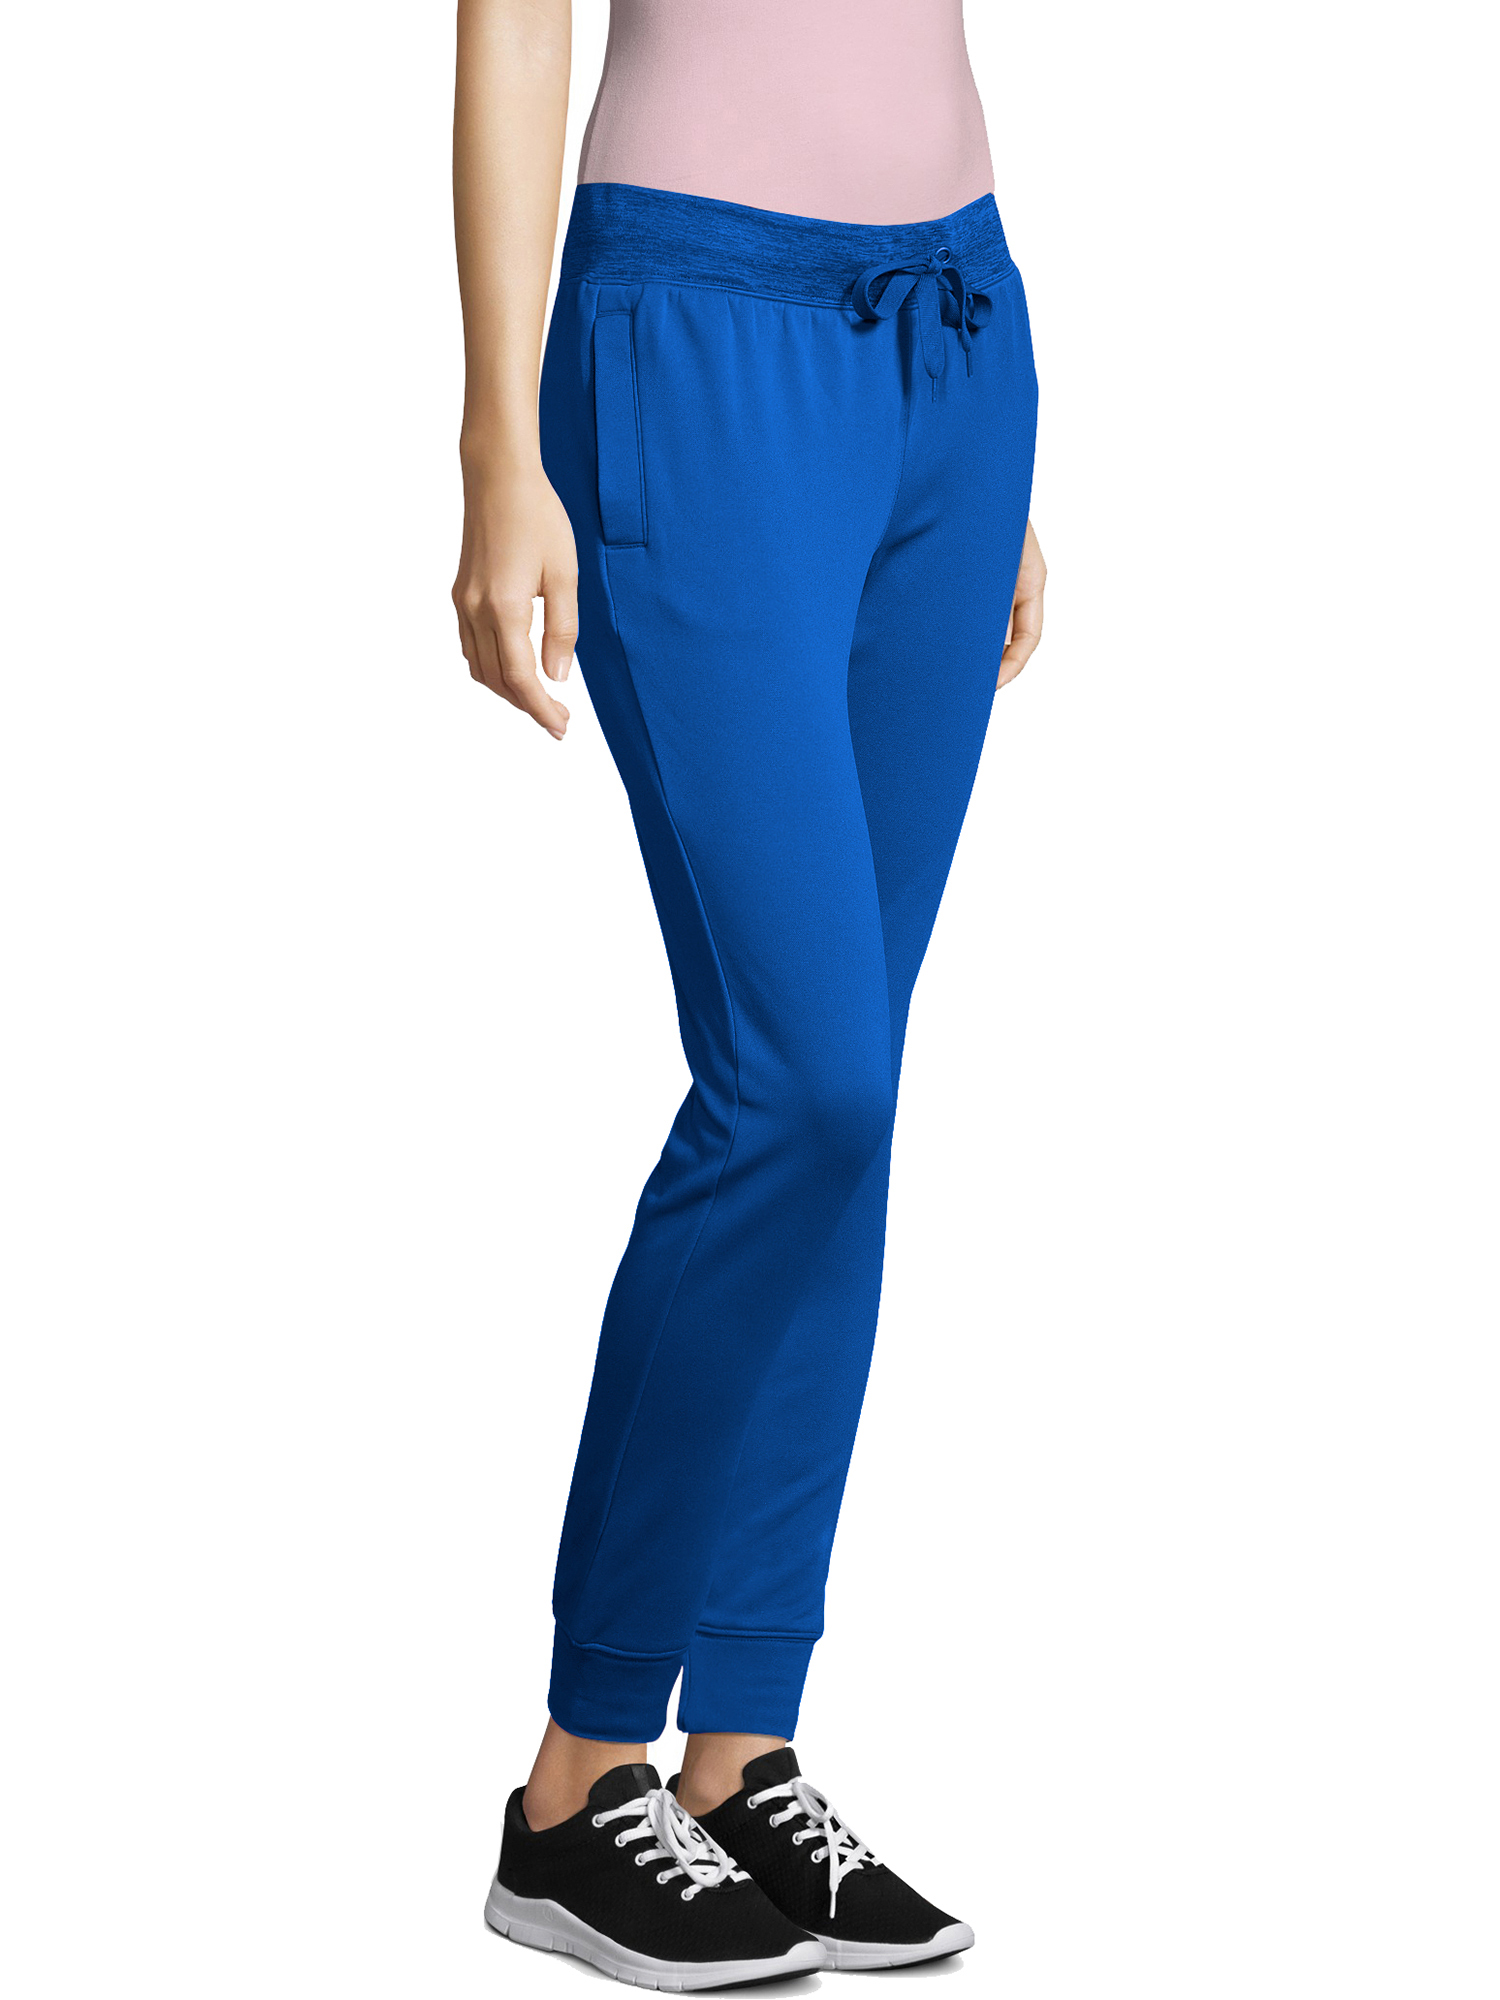 Hanes Sport Women's Performance Fleece Jogger Pants with Pockets - image 3 of 5